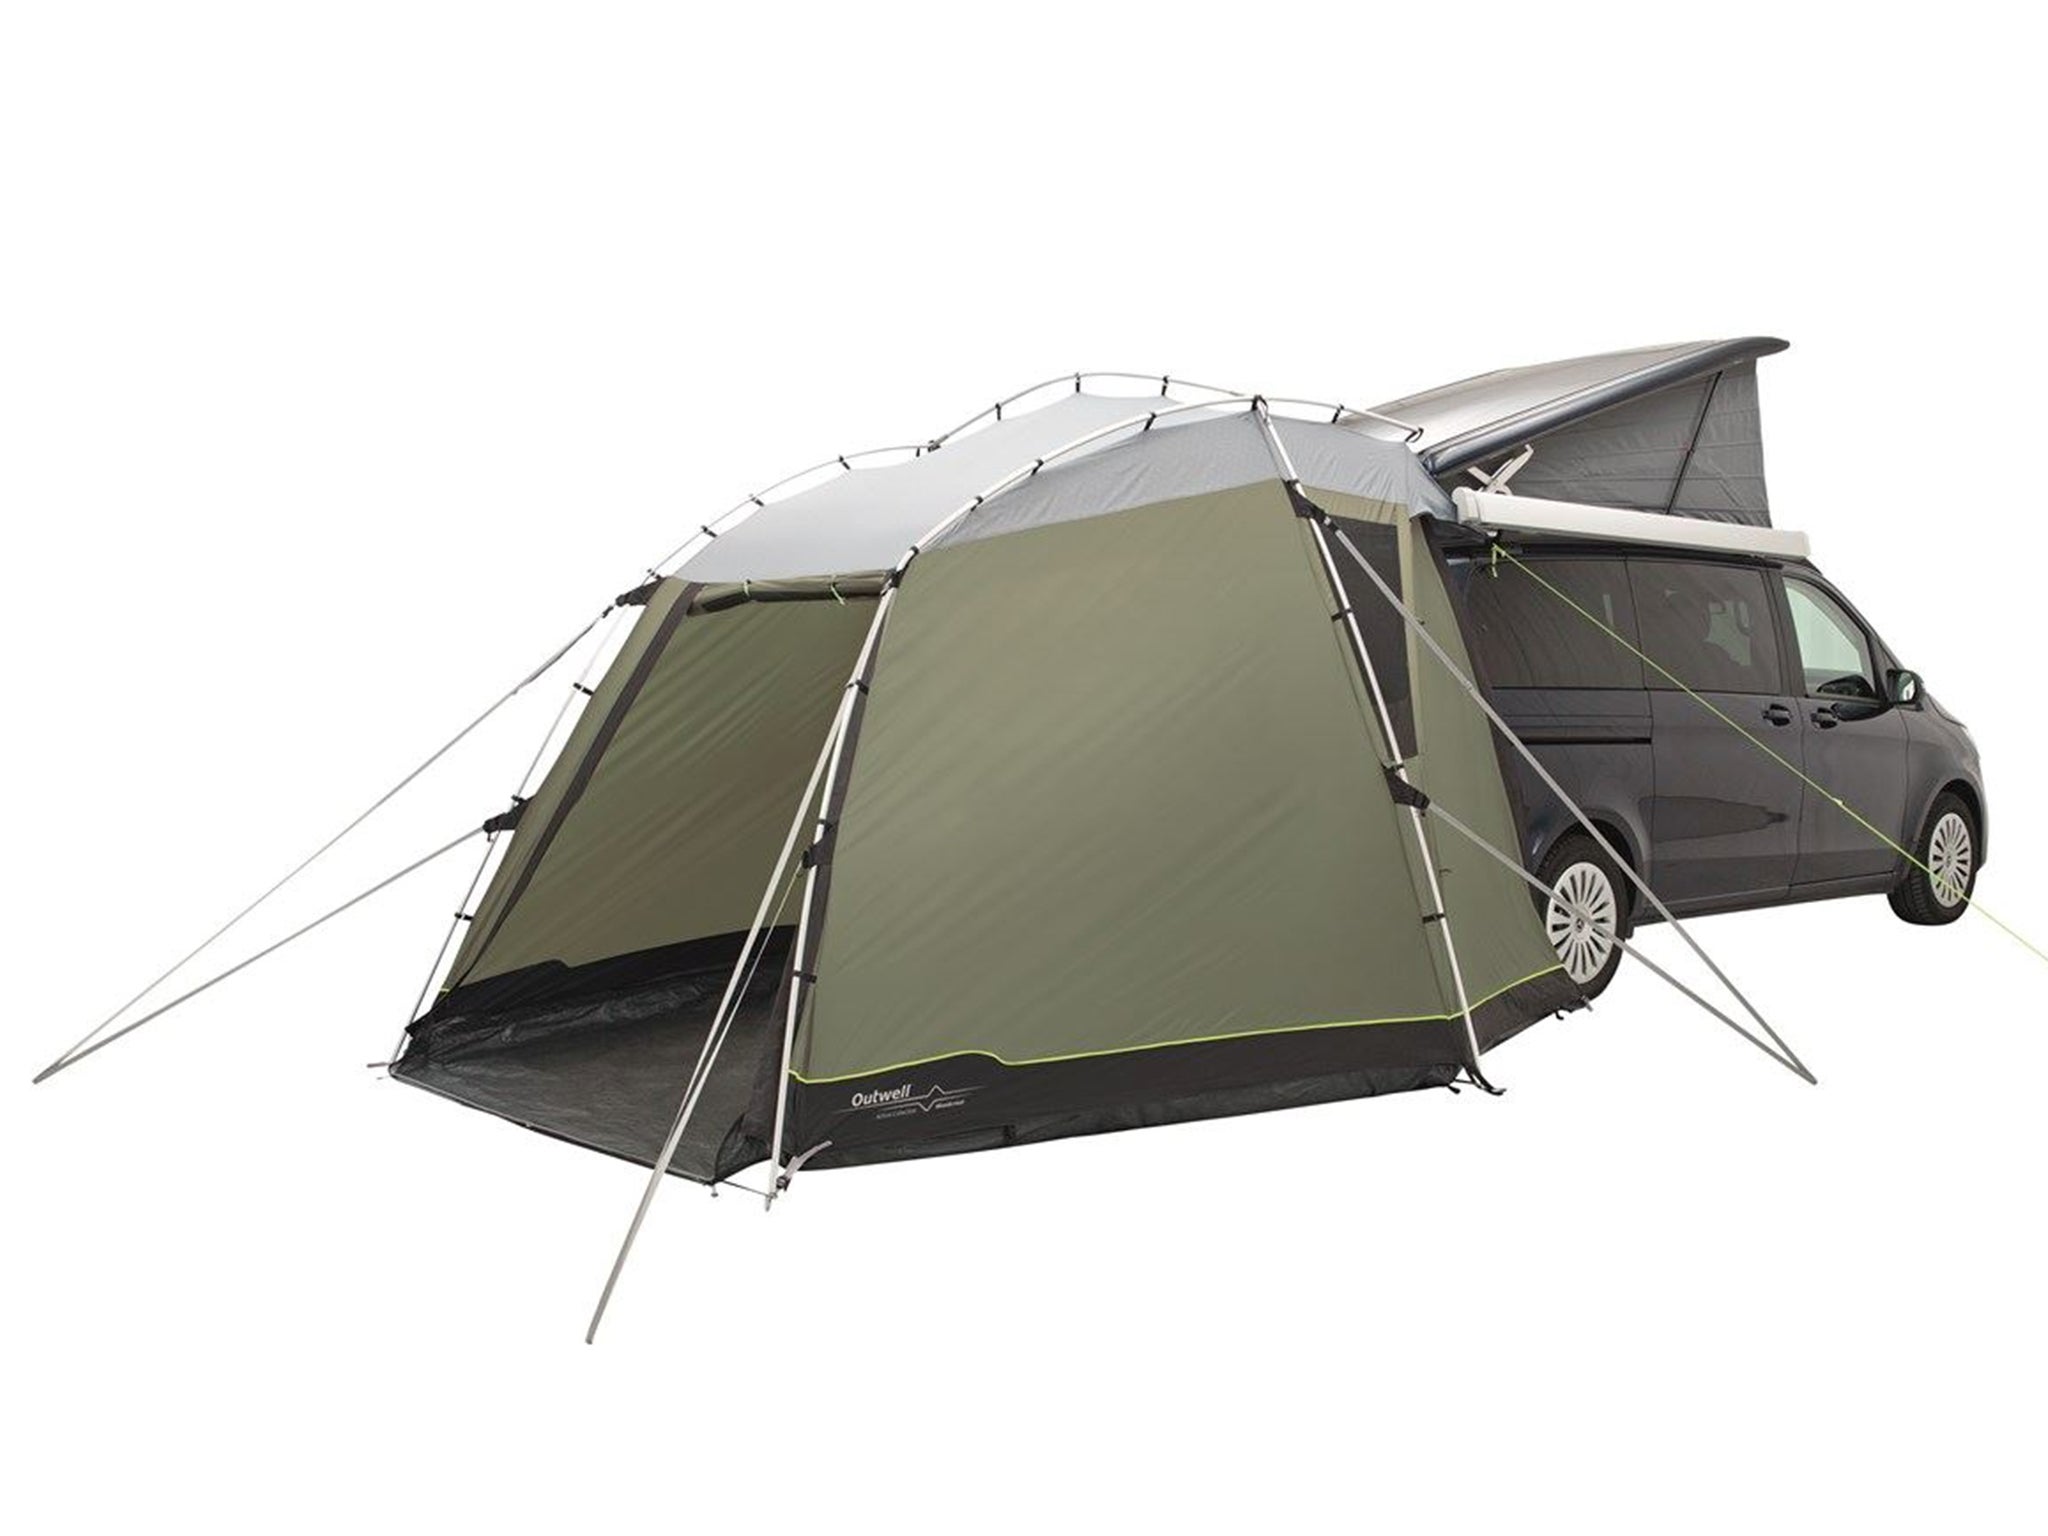 Outwell woodcrest tailgate awning.jpg